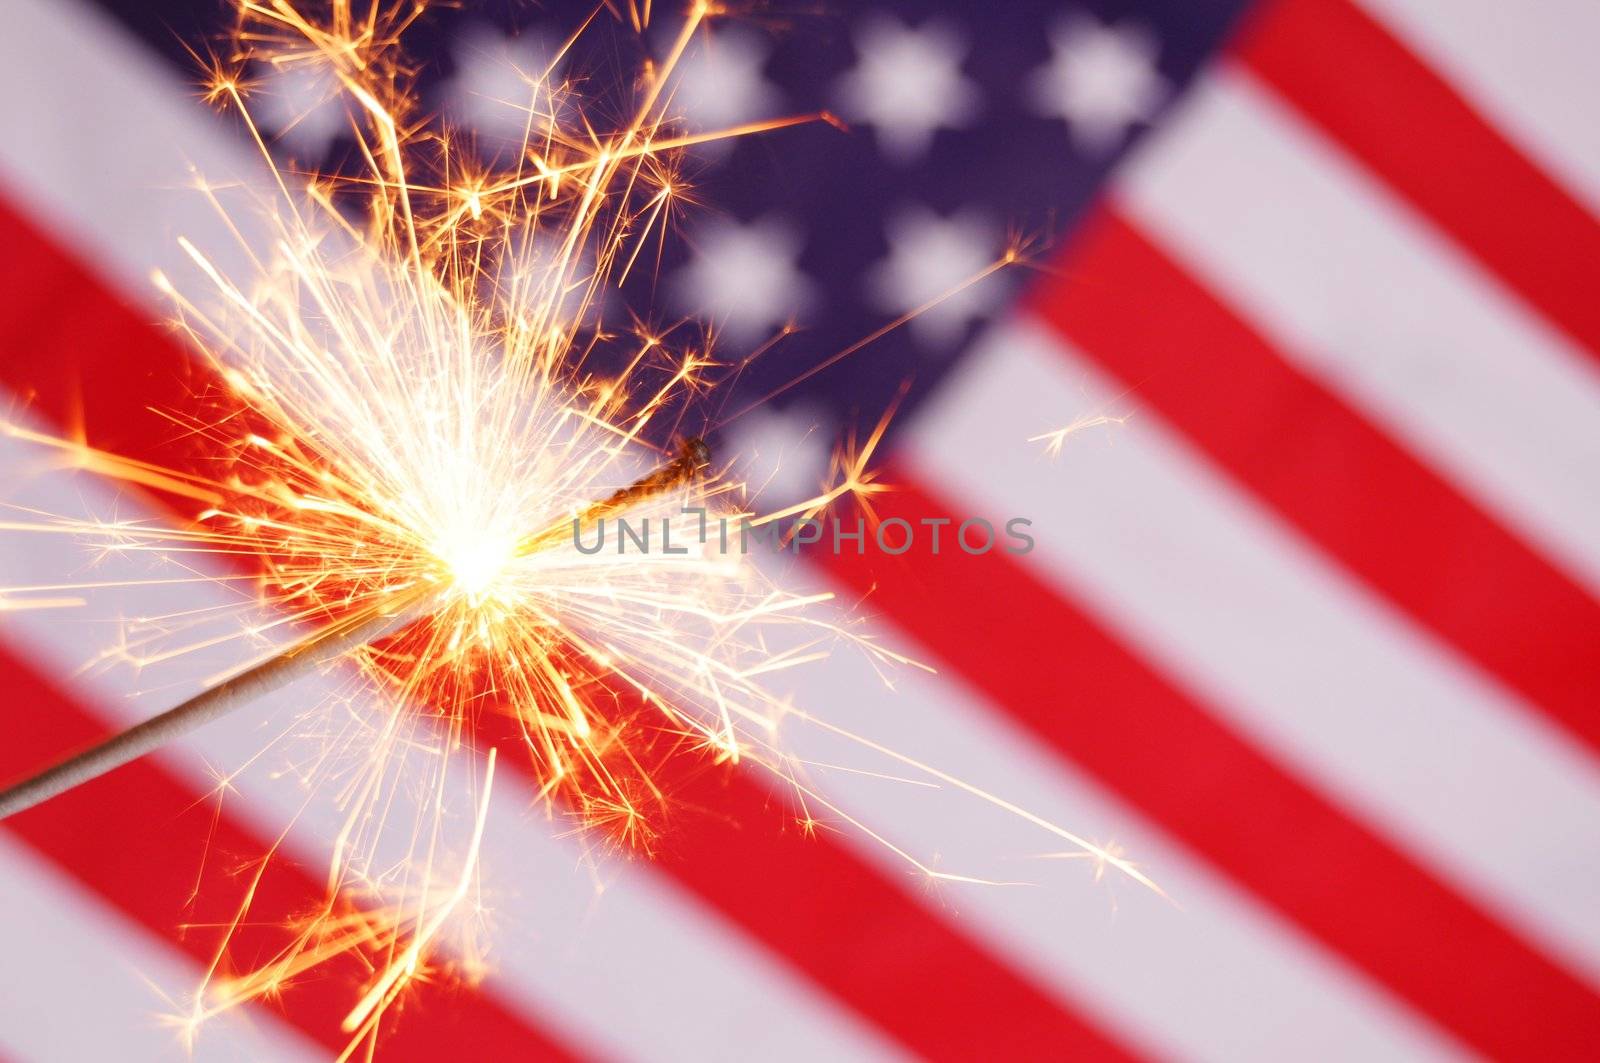 sparkler and usa flag showing 4th of july